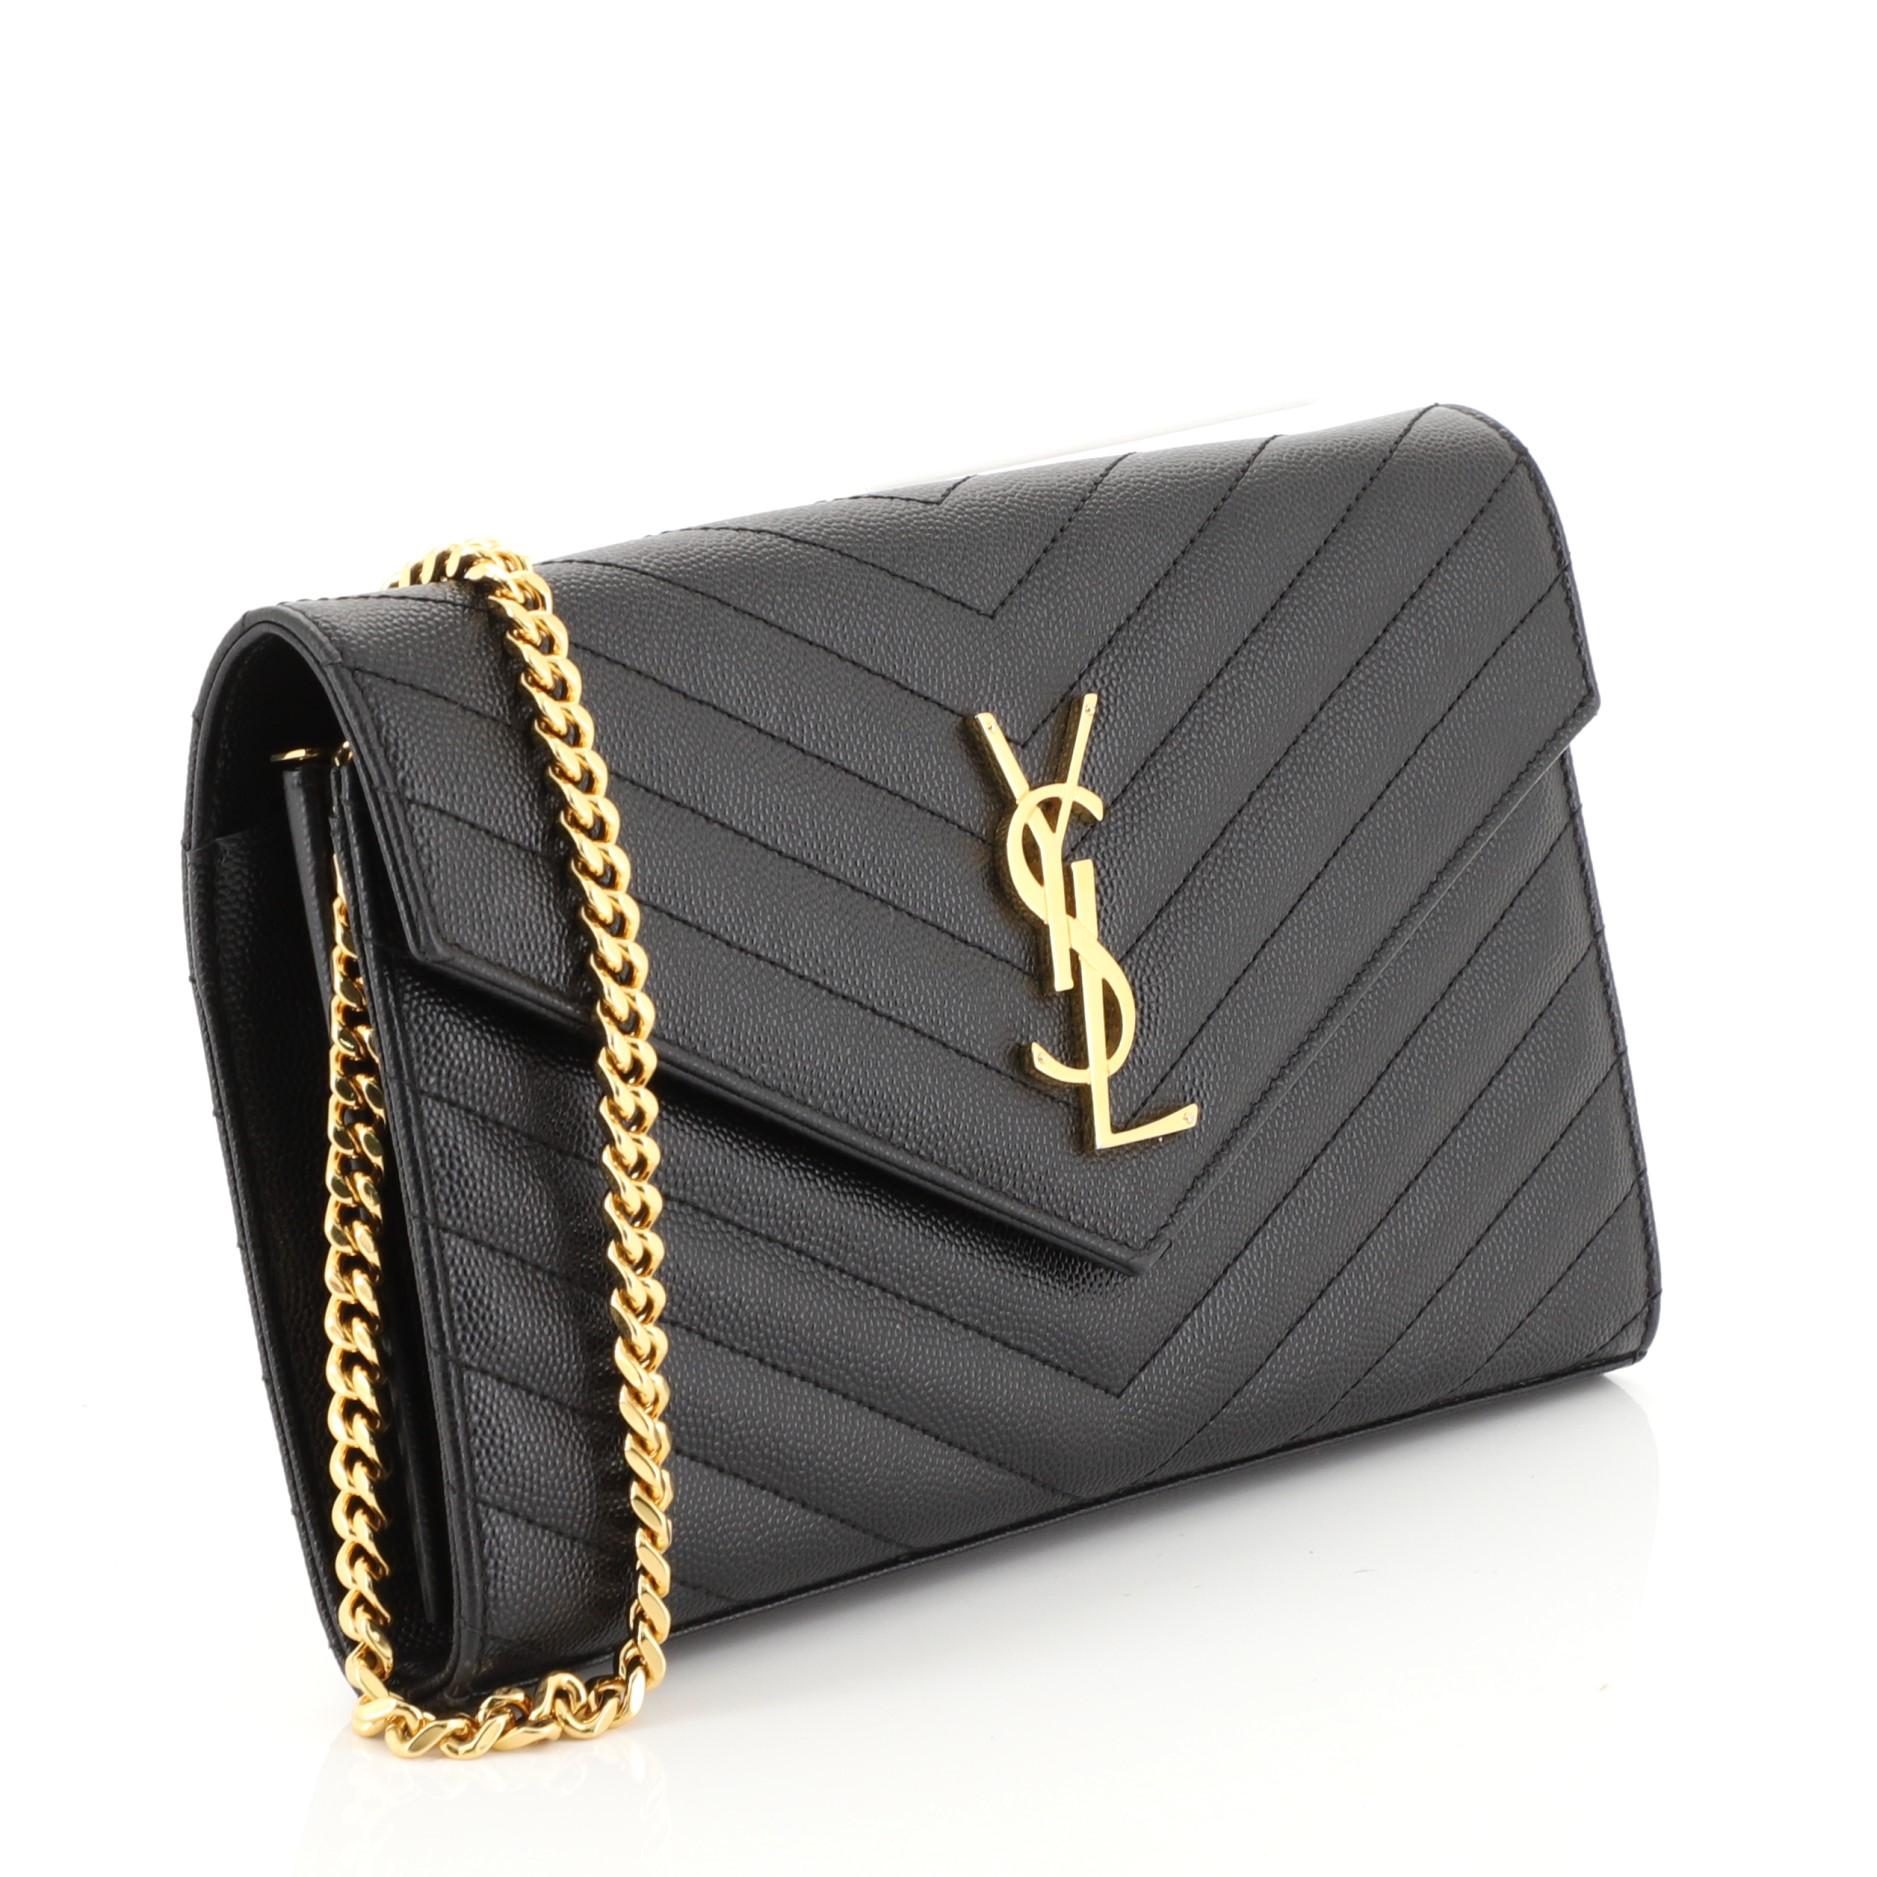 This Saint Laurent Classic Monogram Wallet on Chain Matelasse Chevron Leather Medium, crafted from black matelasse chevron leather, features chain link strap, YSL monogram logo at the front, and gold-tone hardware. Its hidden snap closure opens to a